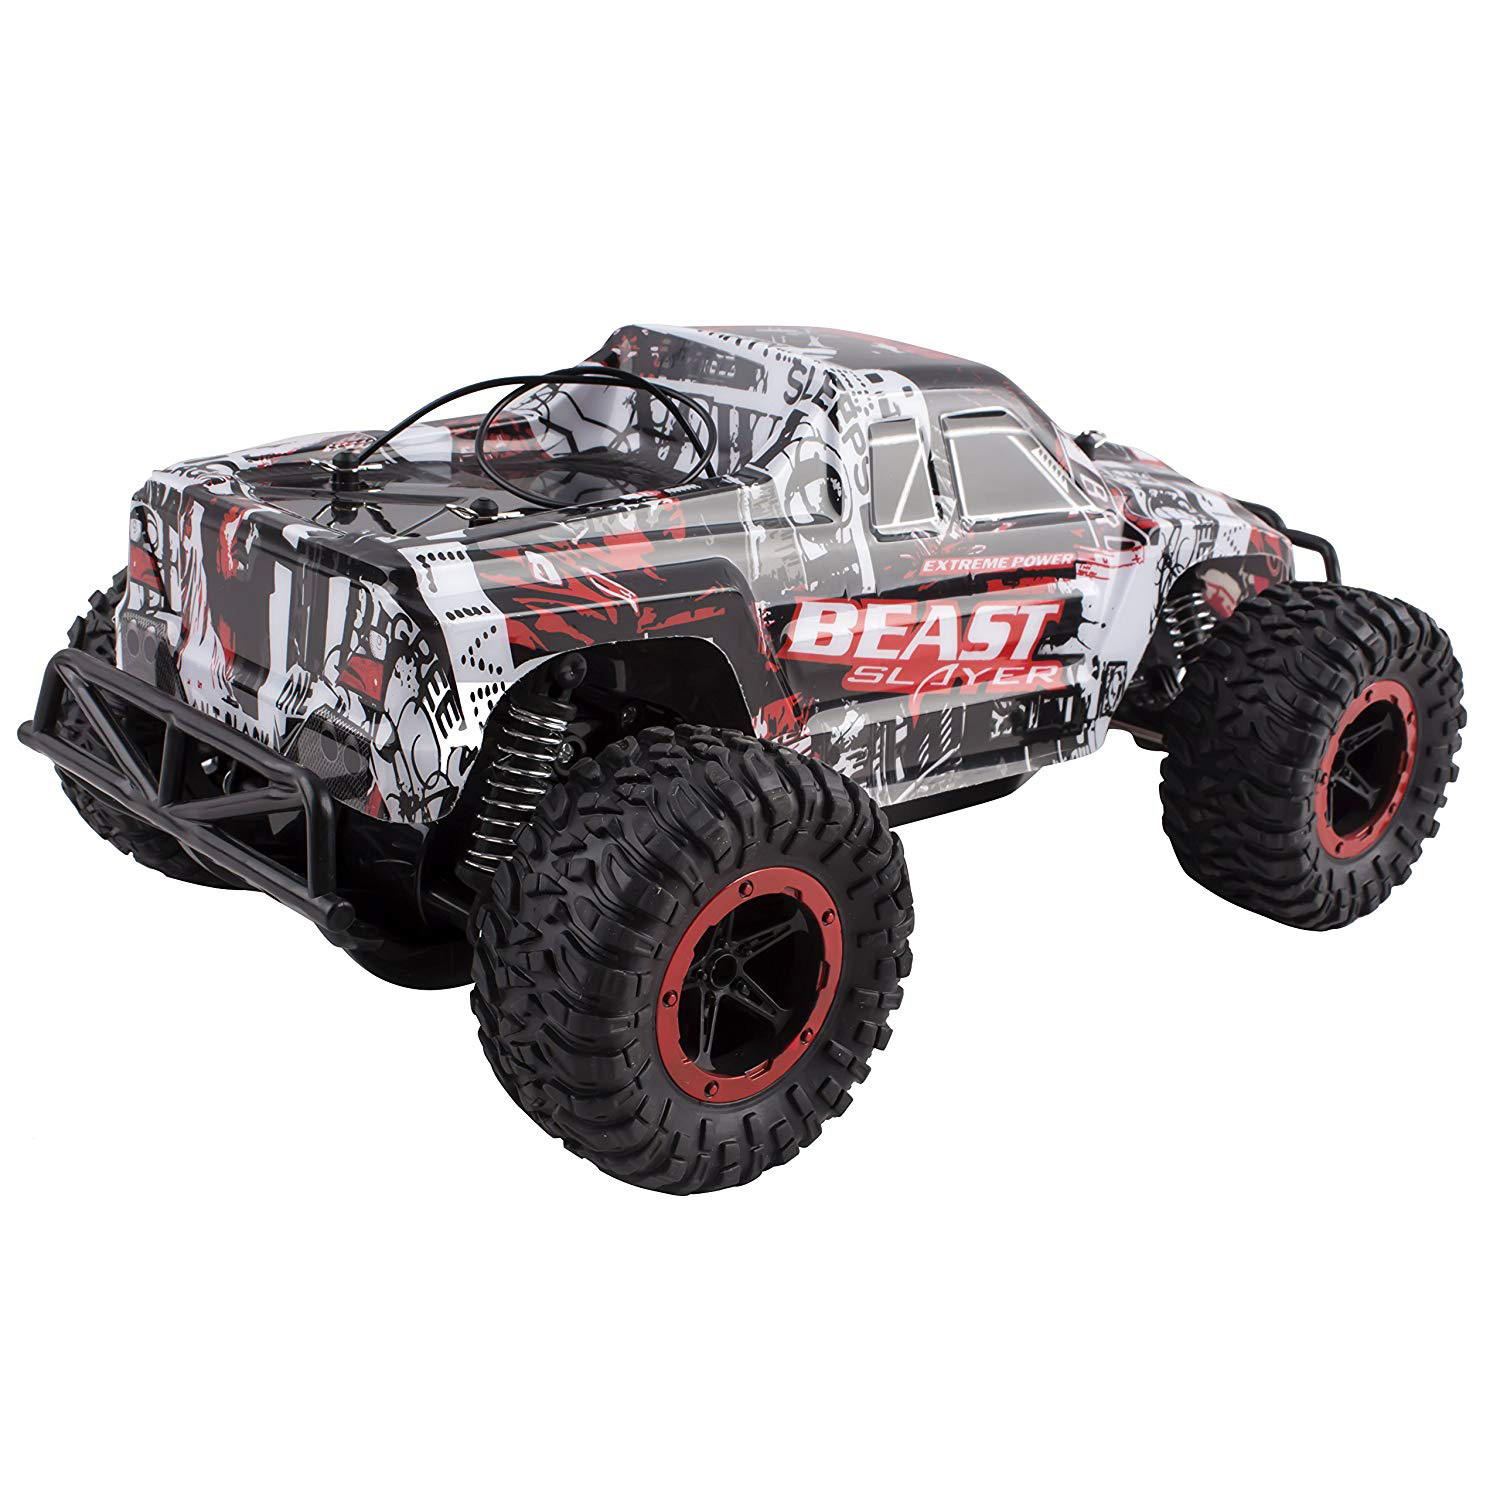 Beast Slayer Truck Removable Body Remote Control Turbo RC Buggy Car Large 1:16 Scale Size RTR With Working Suspension, High Speed, Radio Control Off-Road Hobby Truggy Rechargeable (Red) UJ99-1611B